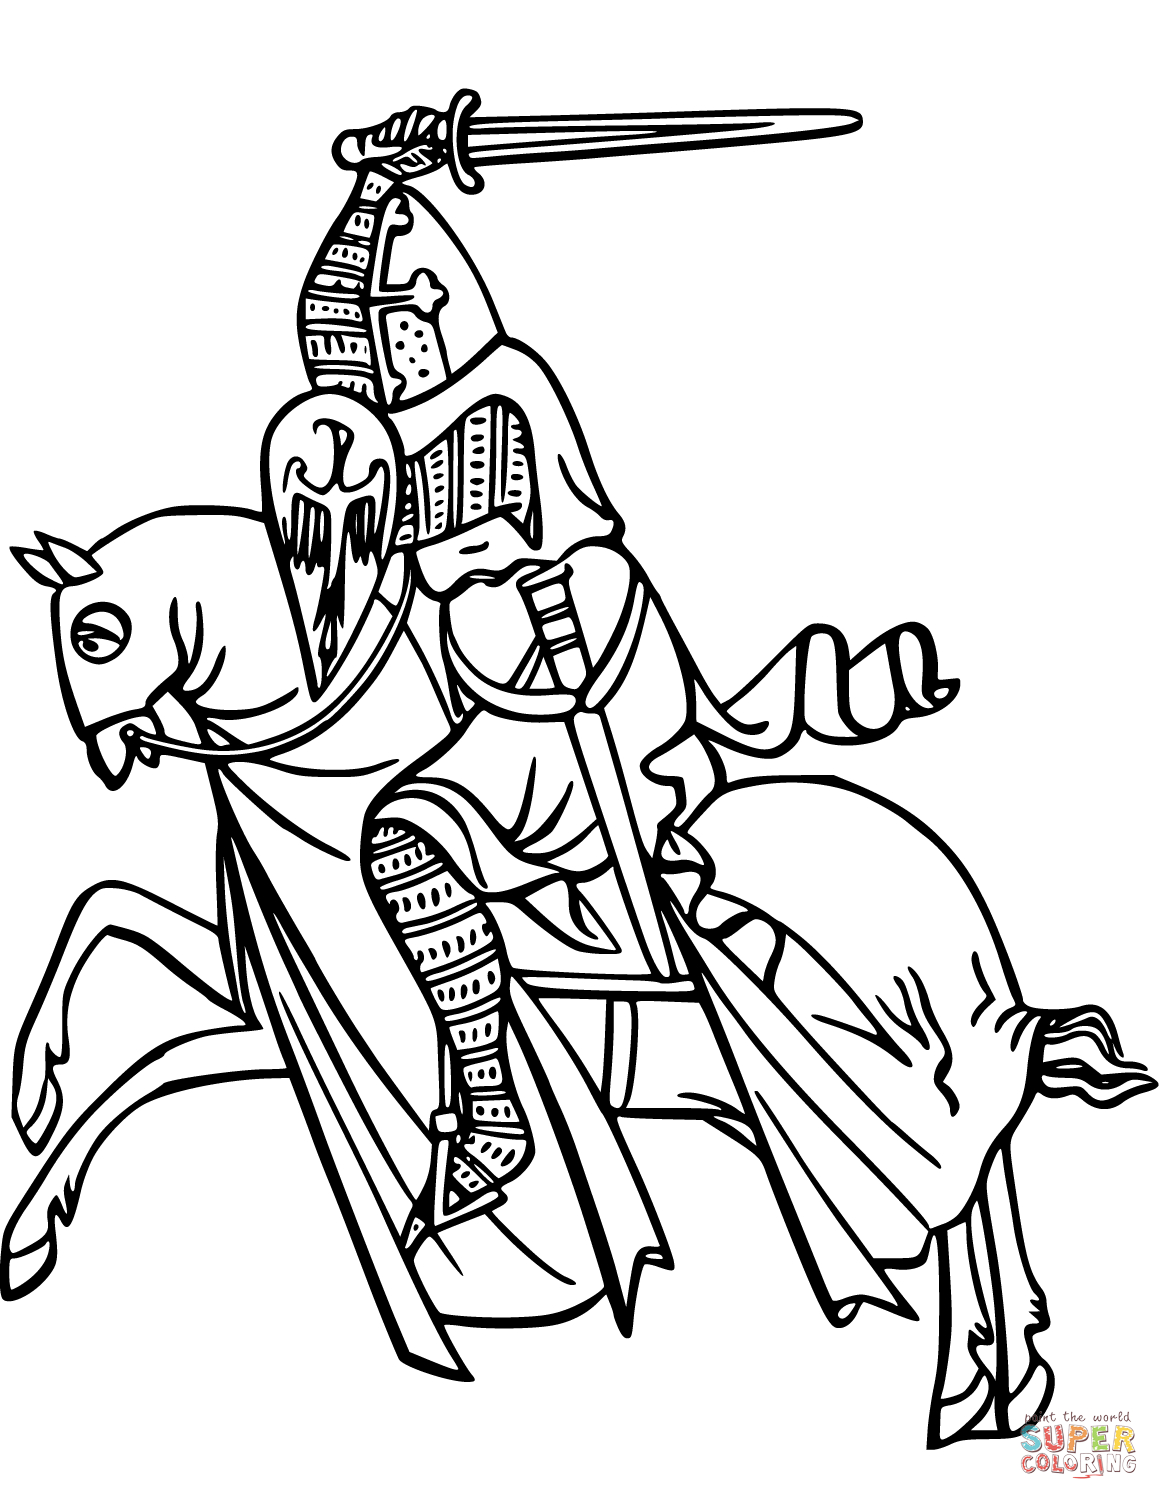 Knight On Horse Coloring Page | Free Printable Coloring Pages - Free Printable Pictures Of Knights